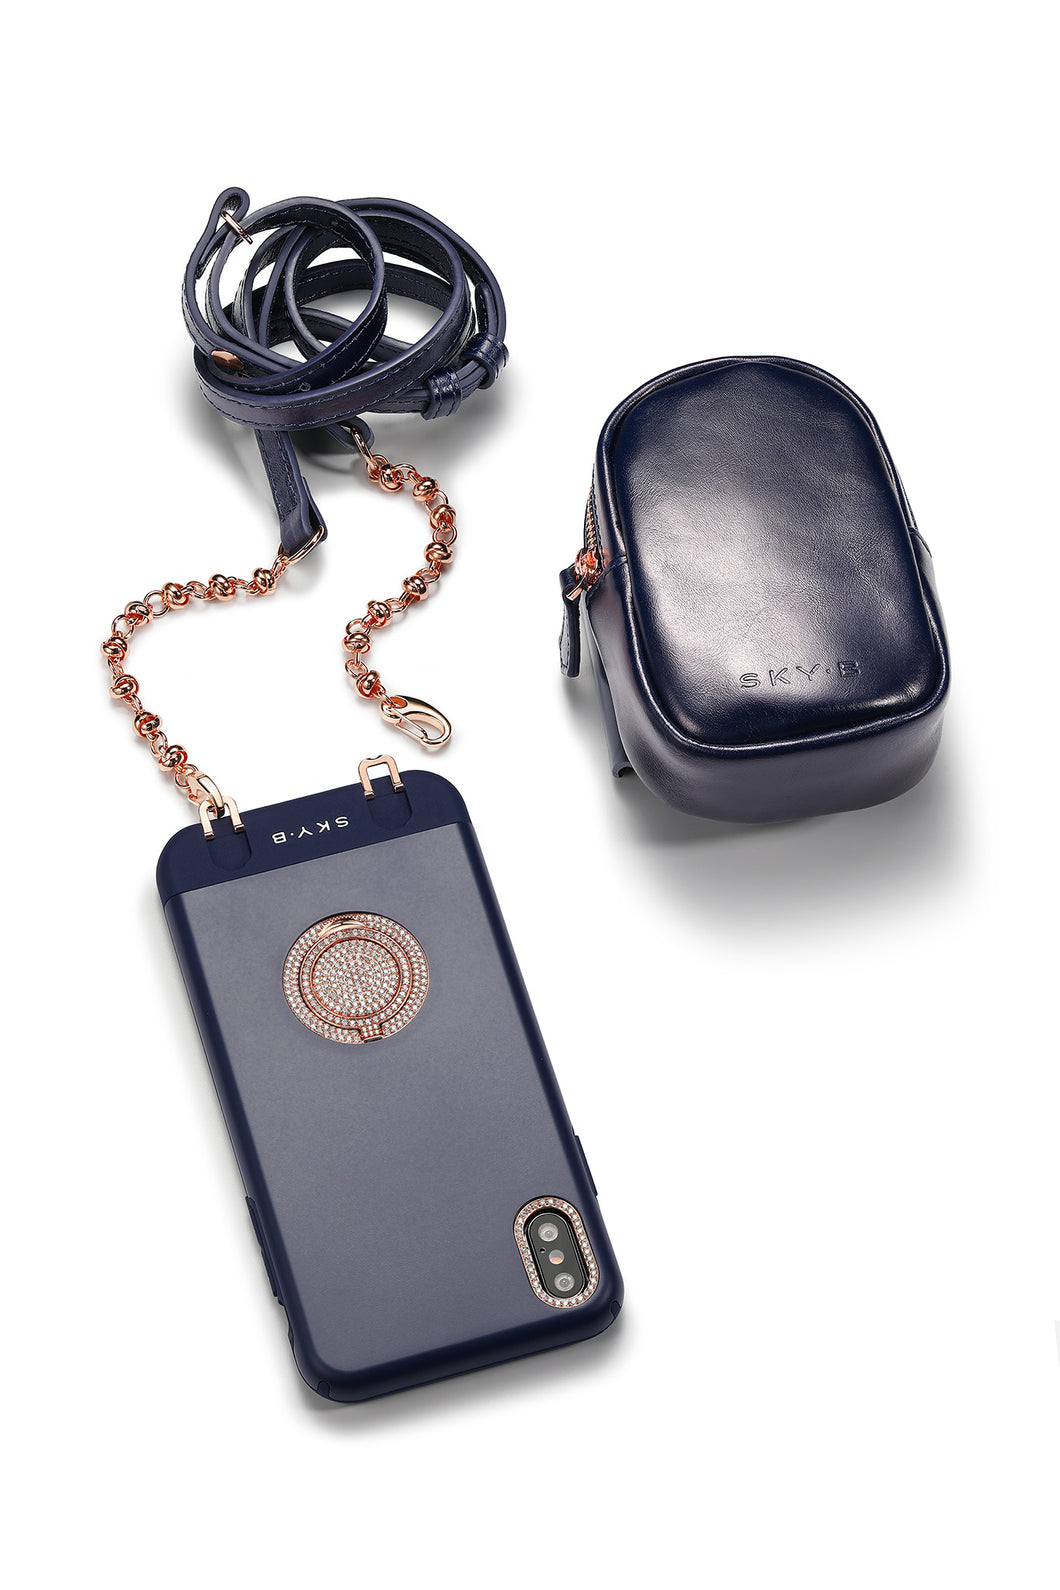 Regal iPhone Case with removable Carry Strap and Pouch - Navy / White / Pink